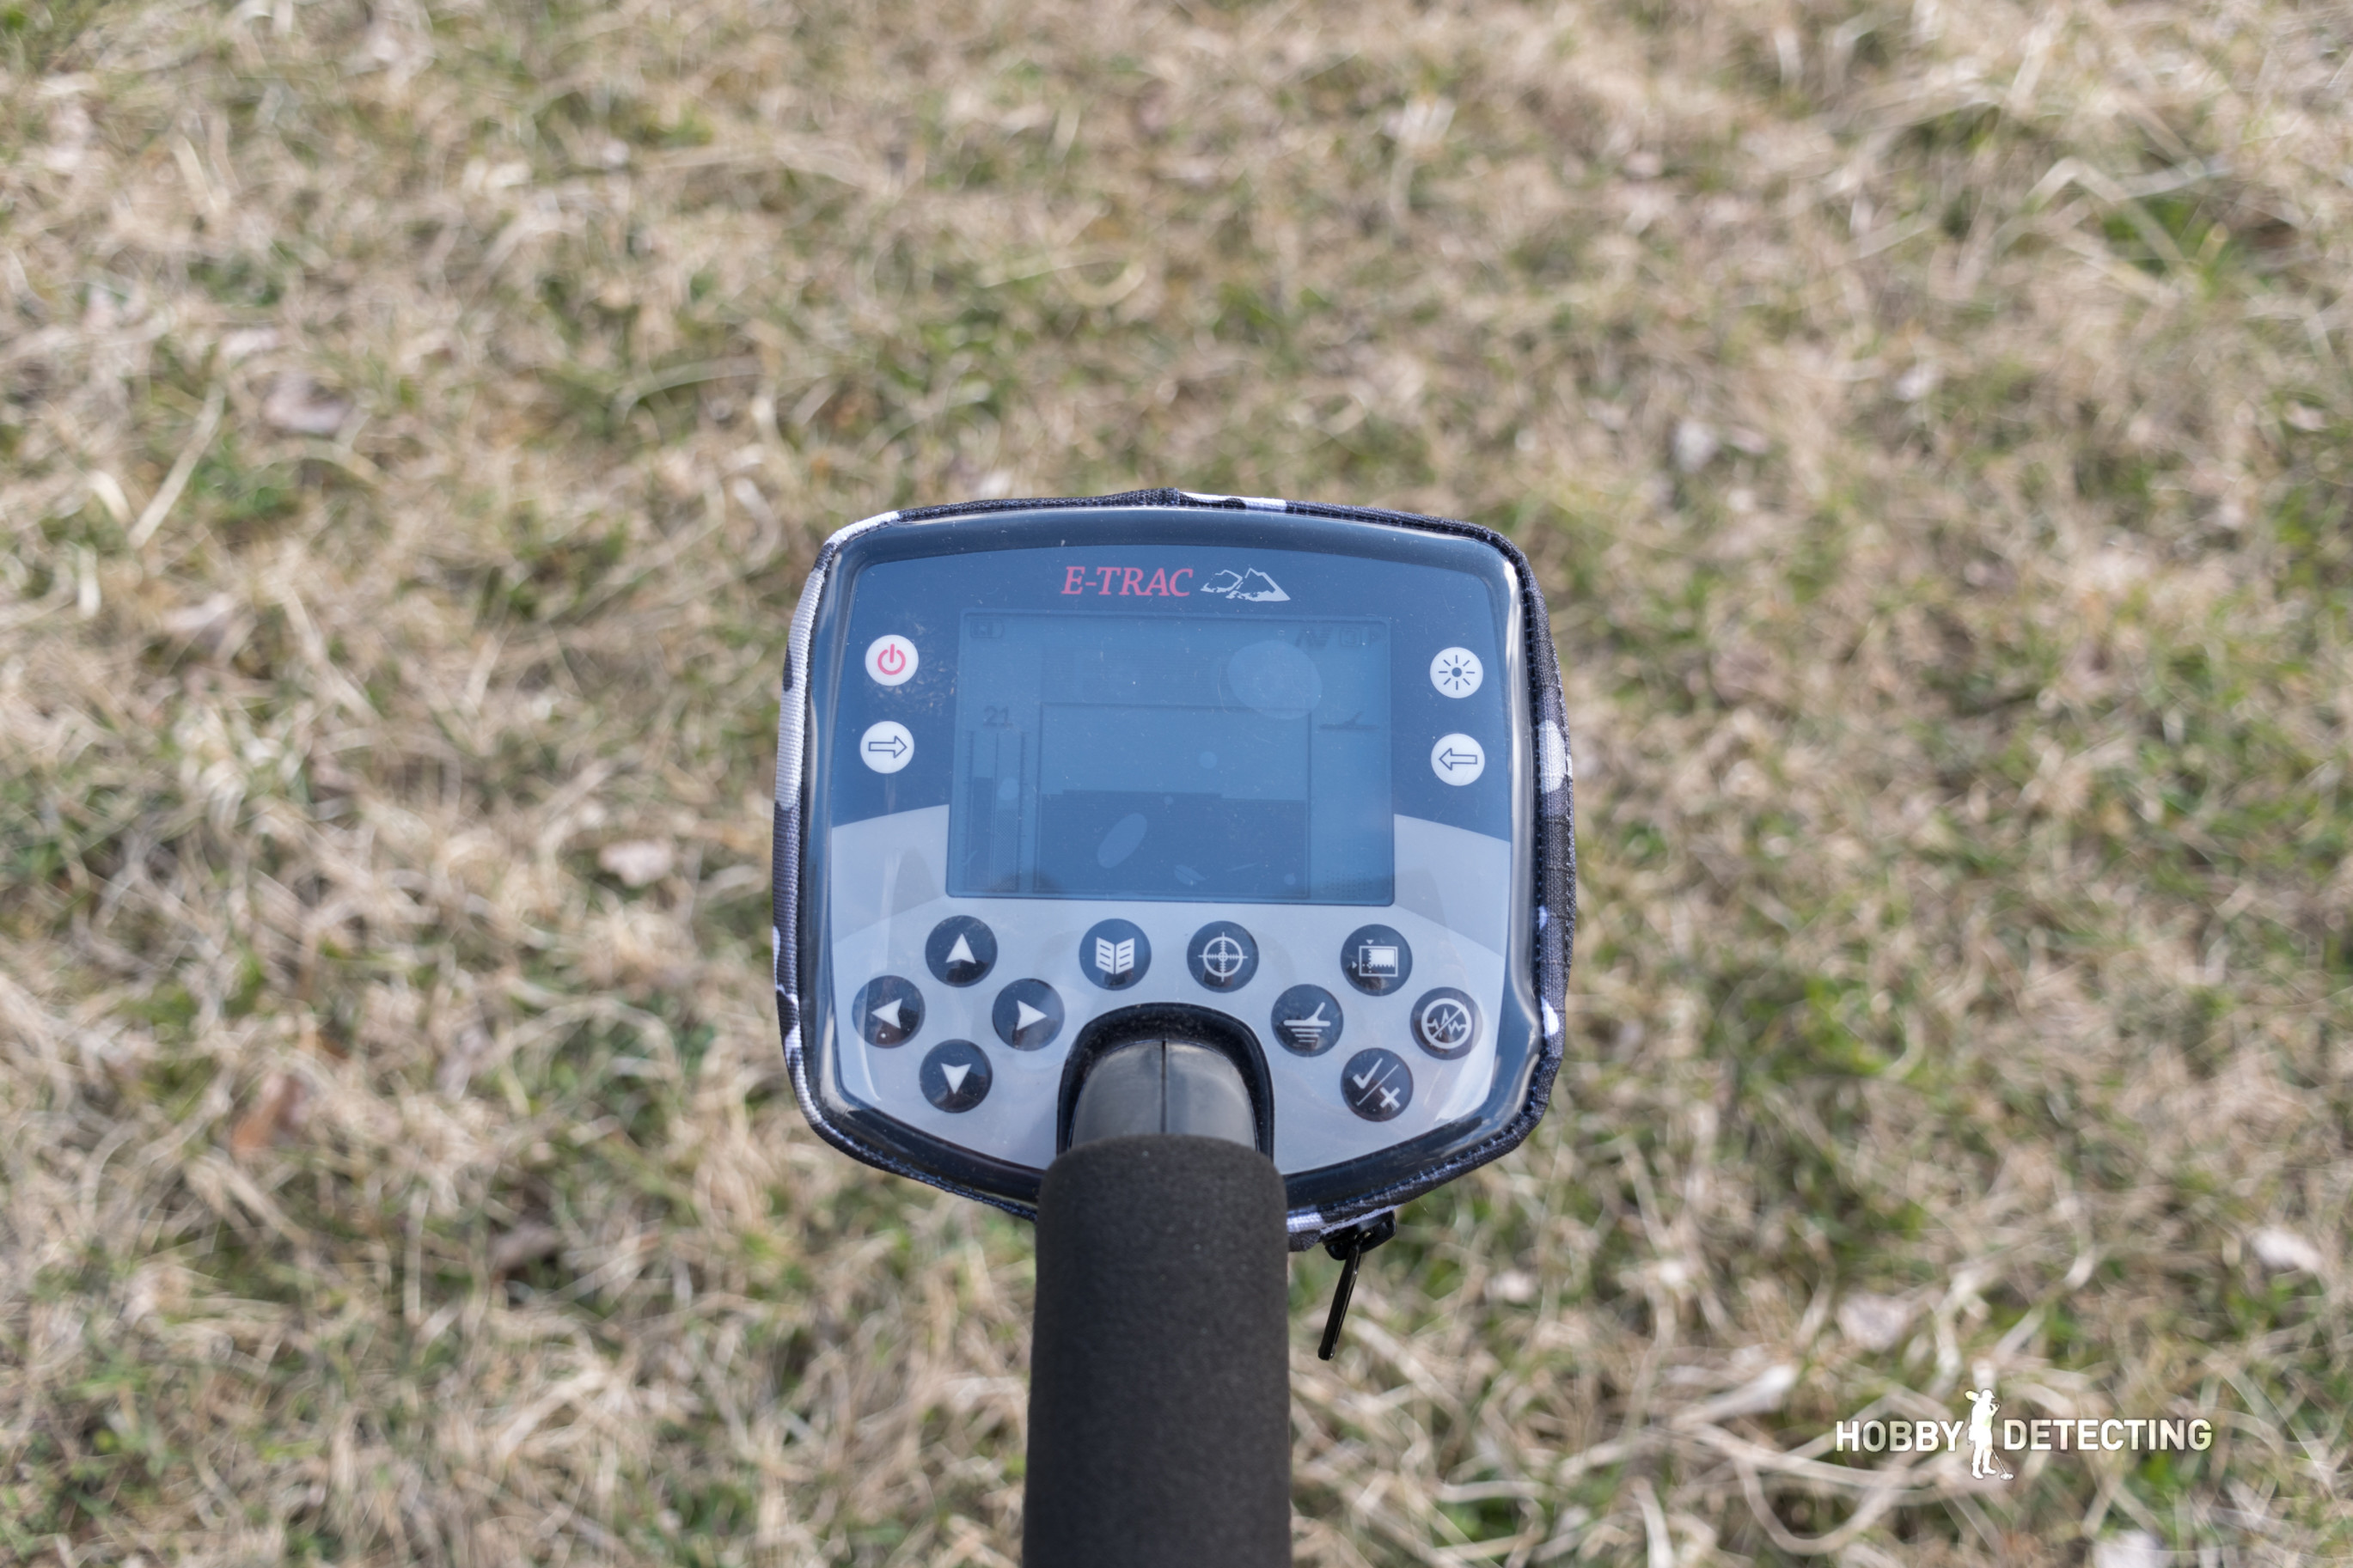 Minelab E-Trac – Though Outdated, But Still A Serious Professional